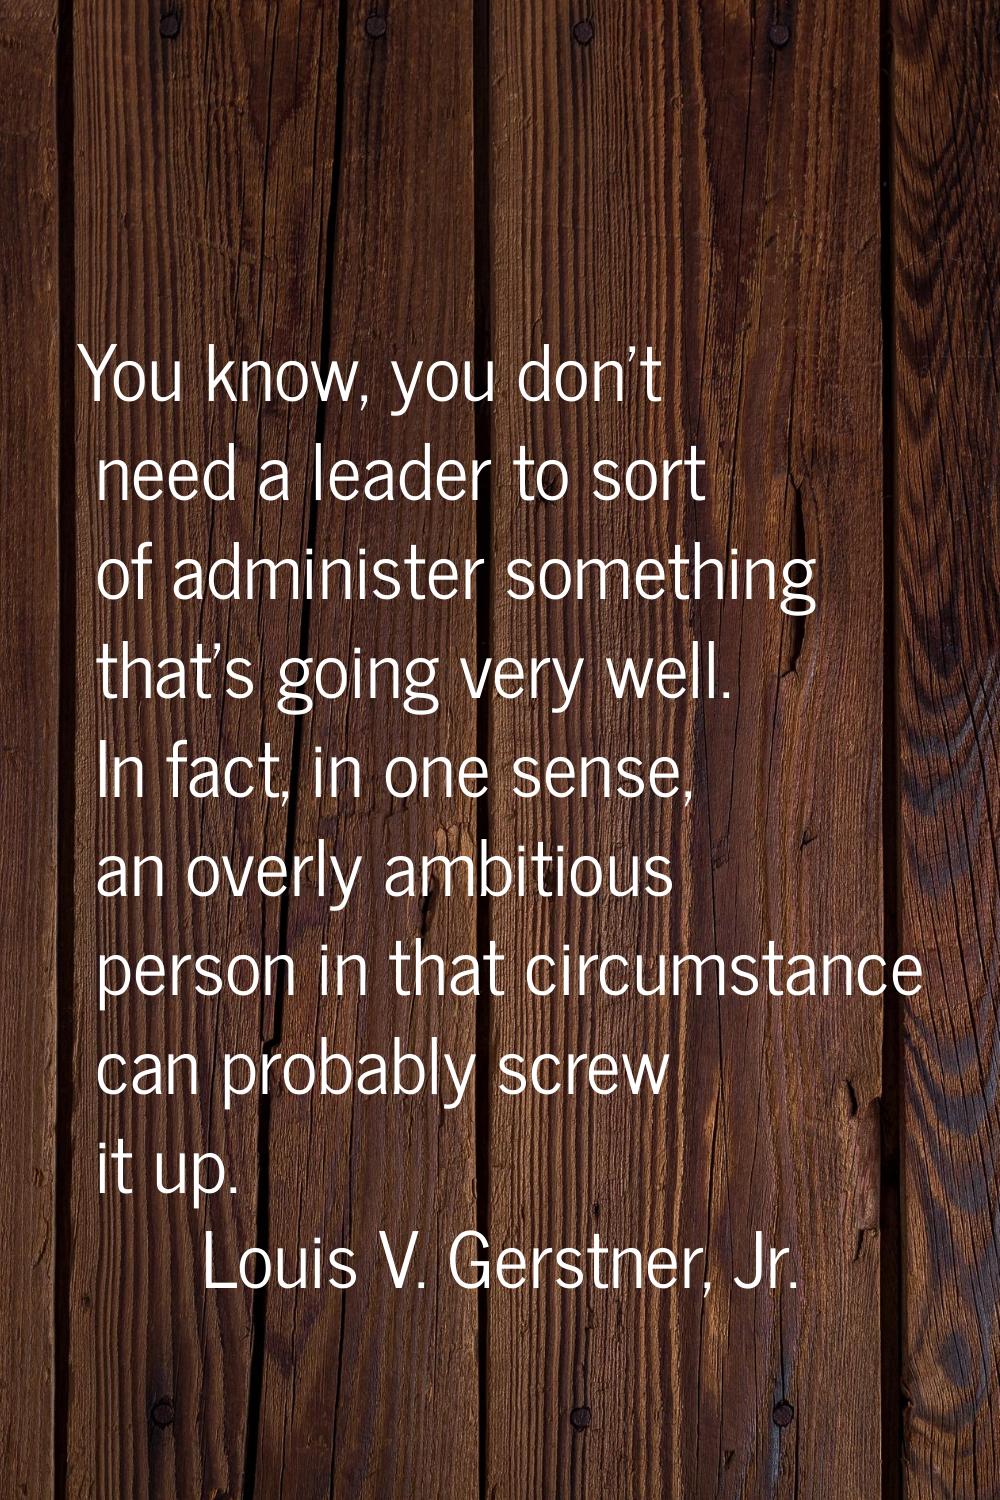 You know, you don't need a leader to sort of administer something that's going very well. In fact, 